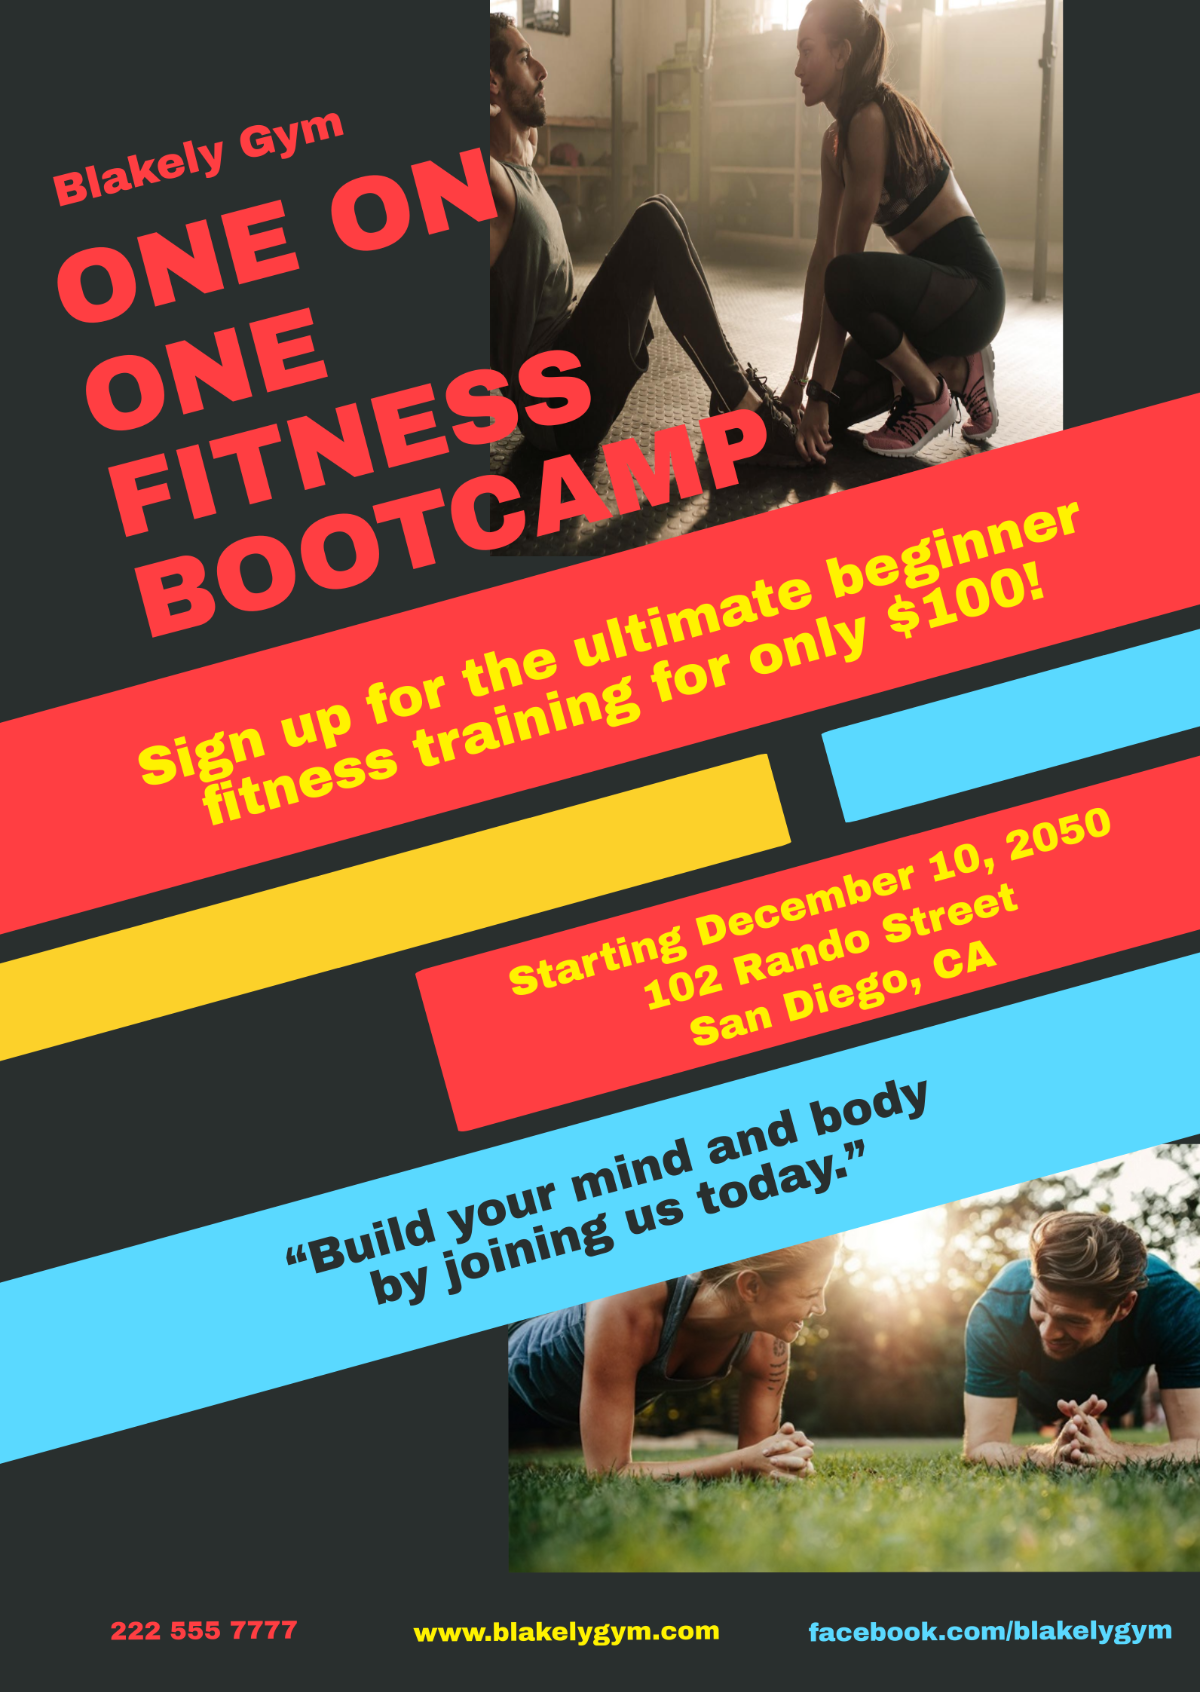 Personal Training Boot Camp Flyer Template